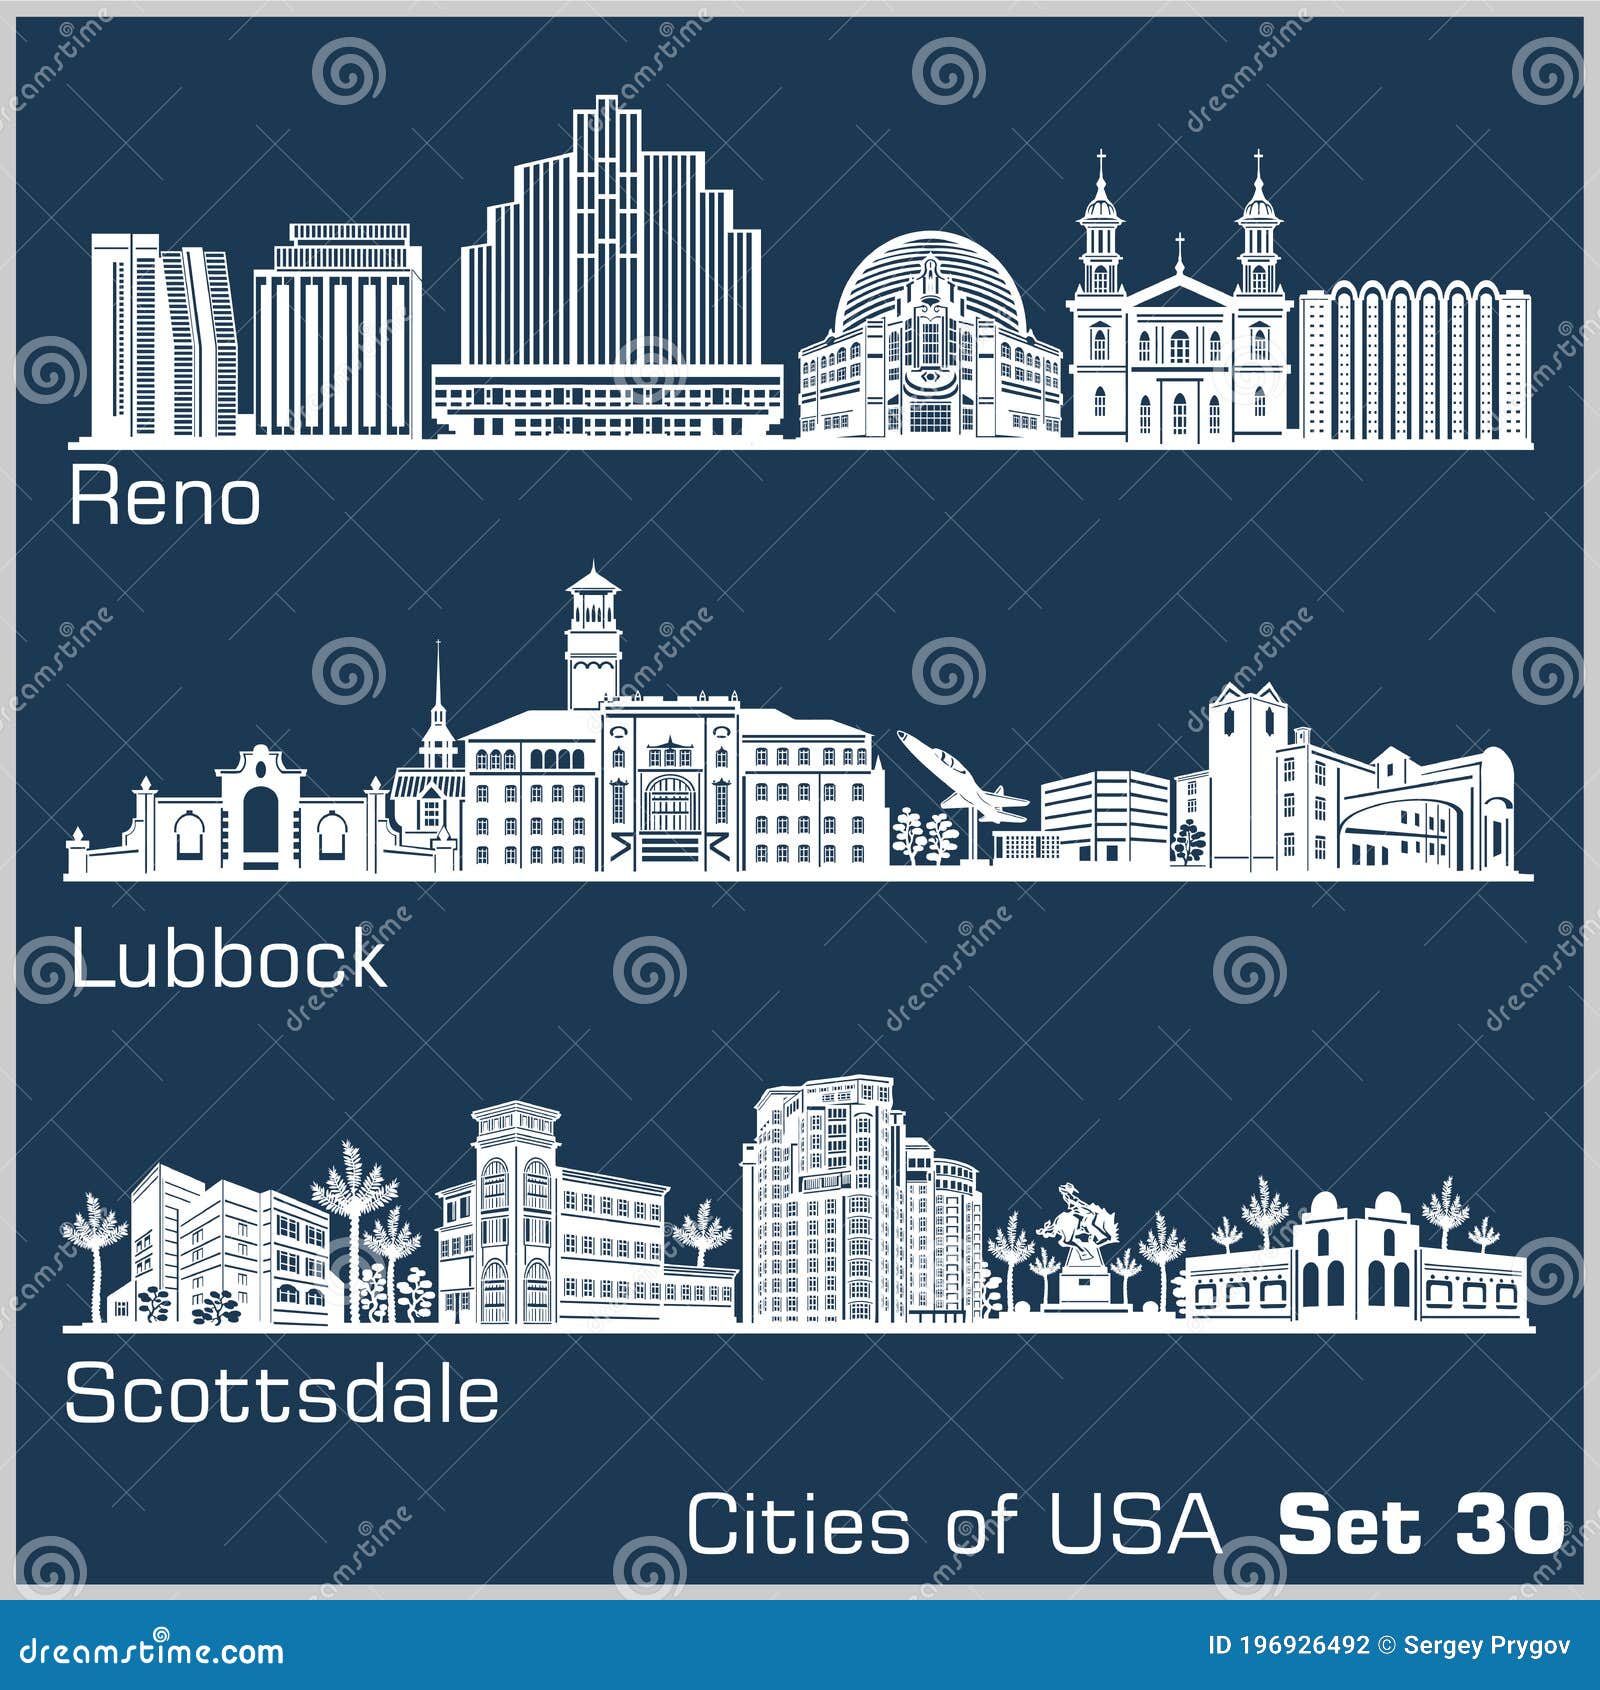 cities of usa - reno, lubbock, scottsdale. detailed architecture. trendy  .